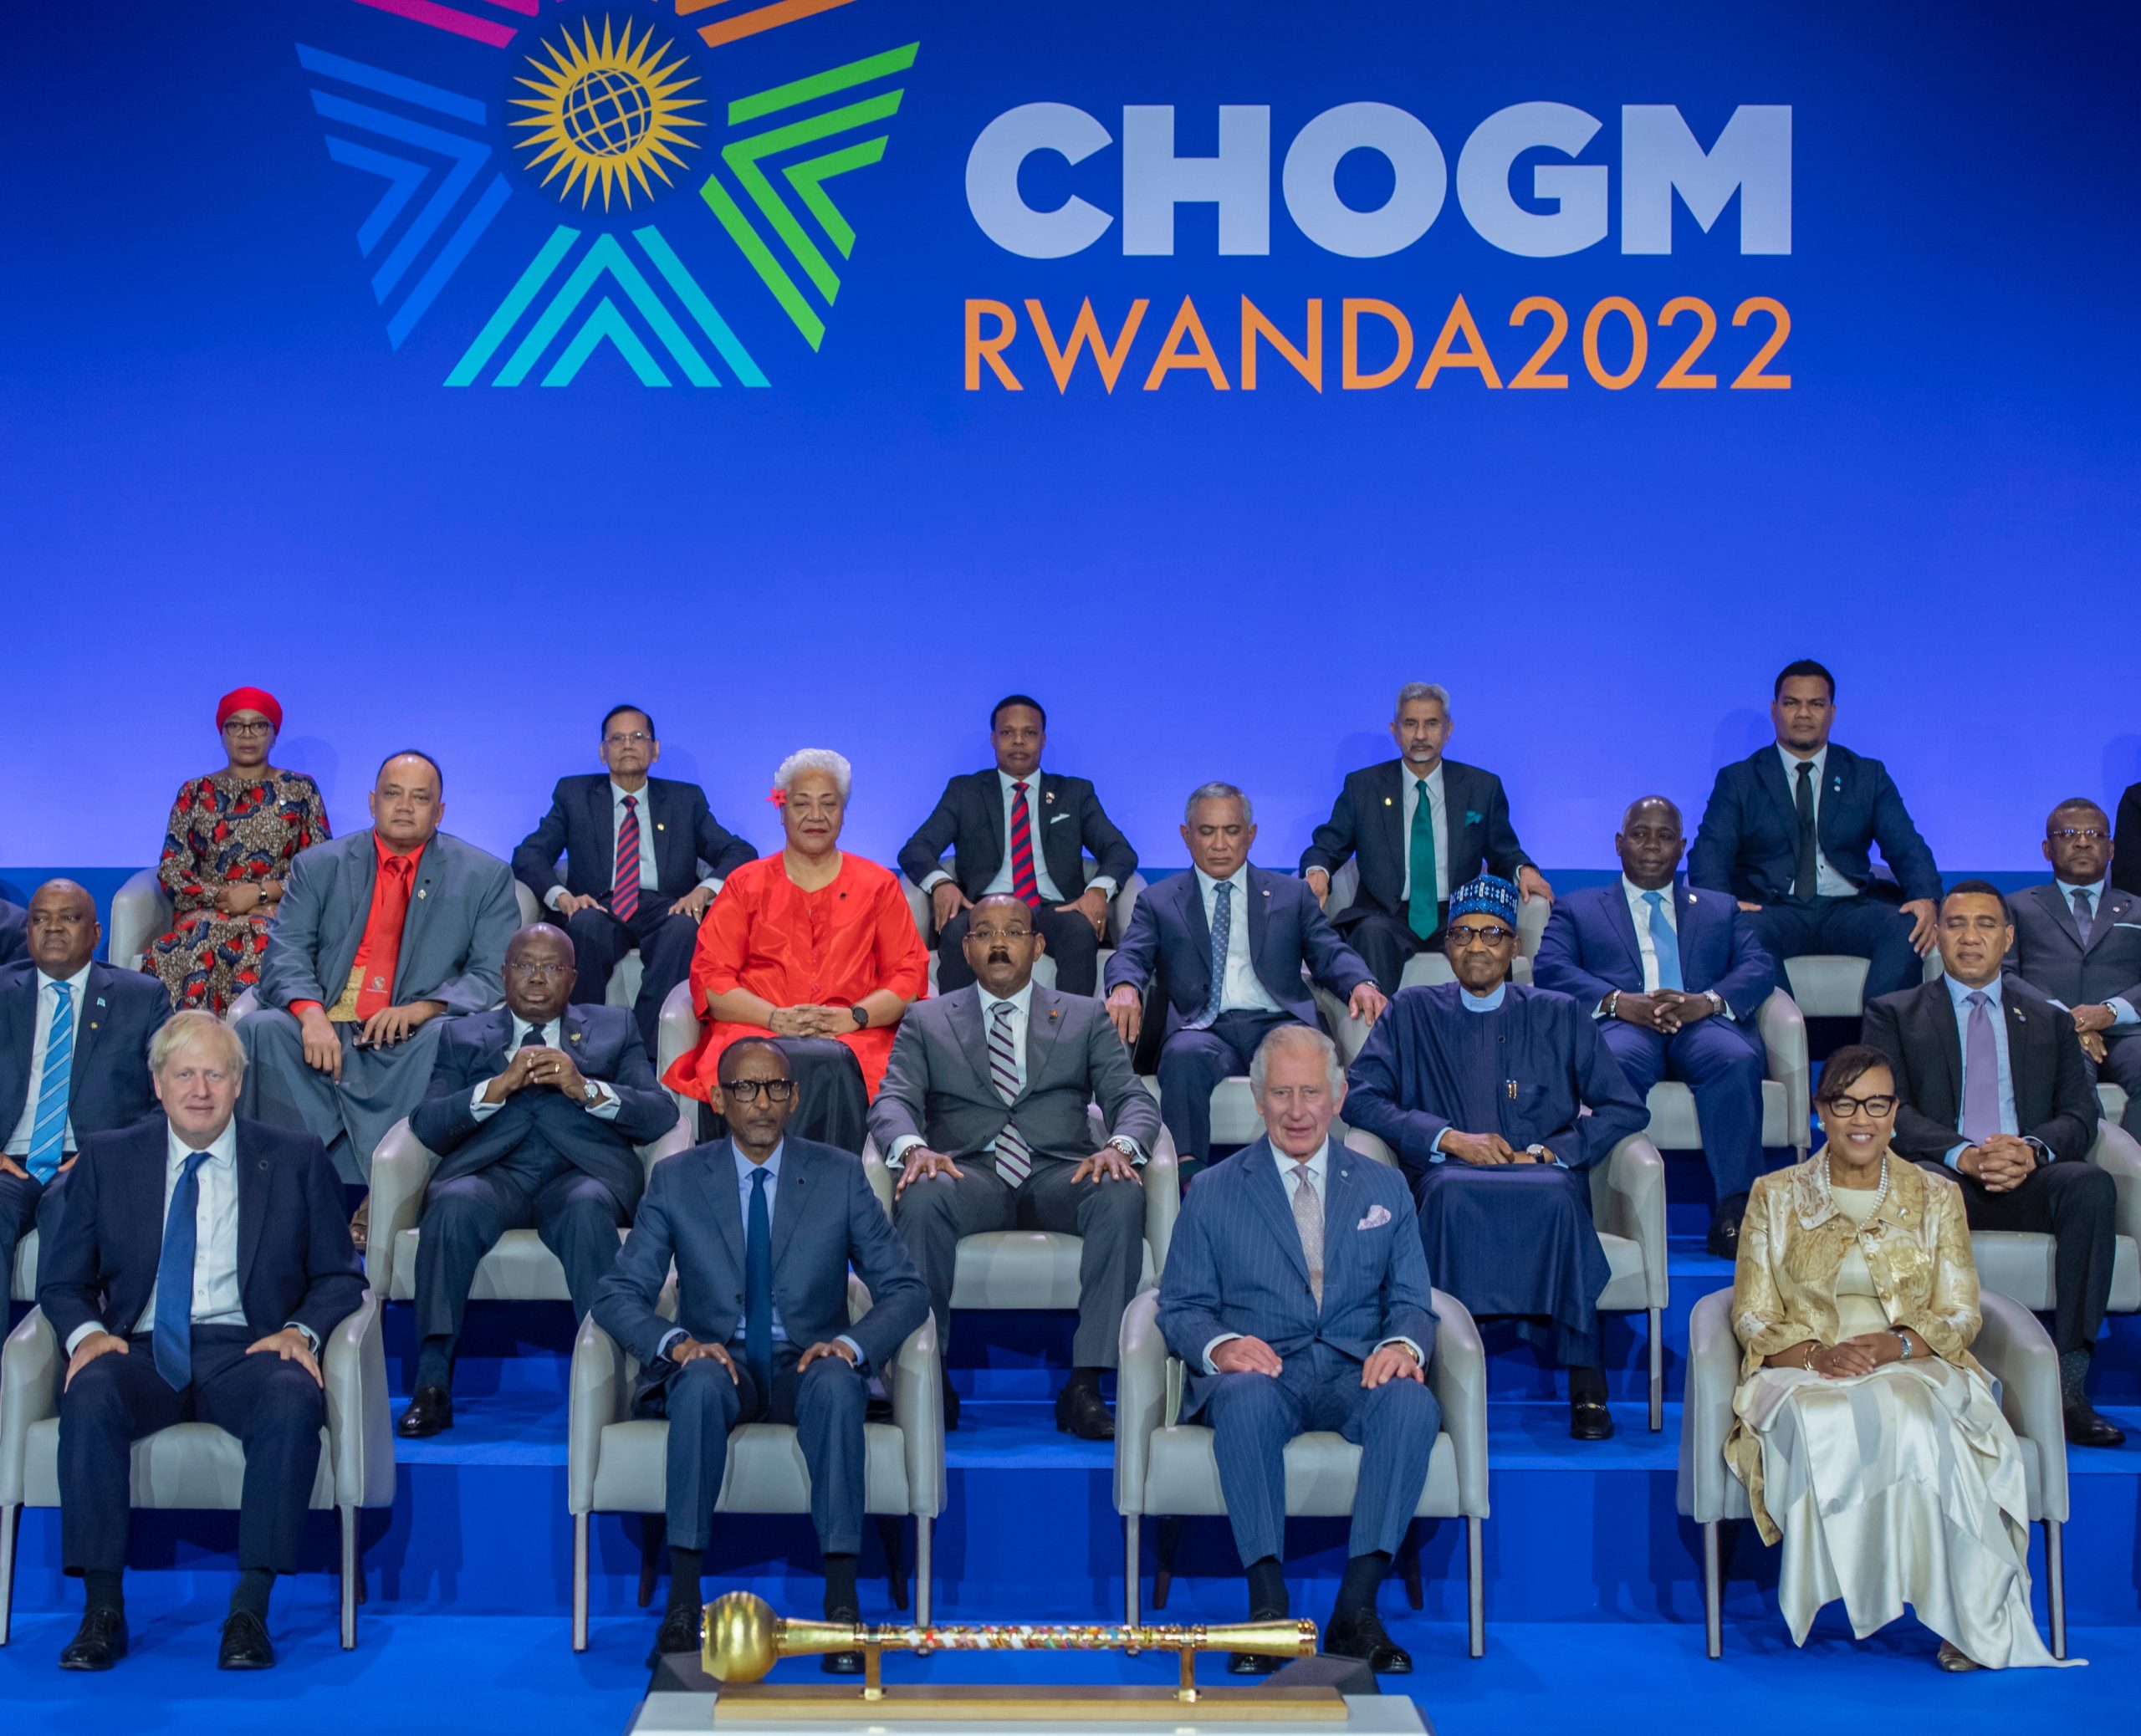 Foreigners working in Rwanda say they are happy with the CHOGM meeting ...